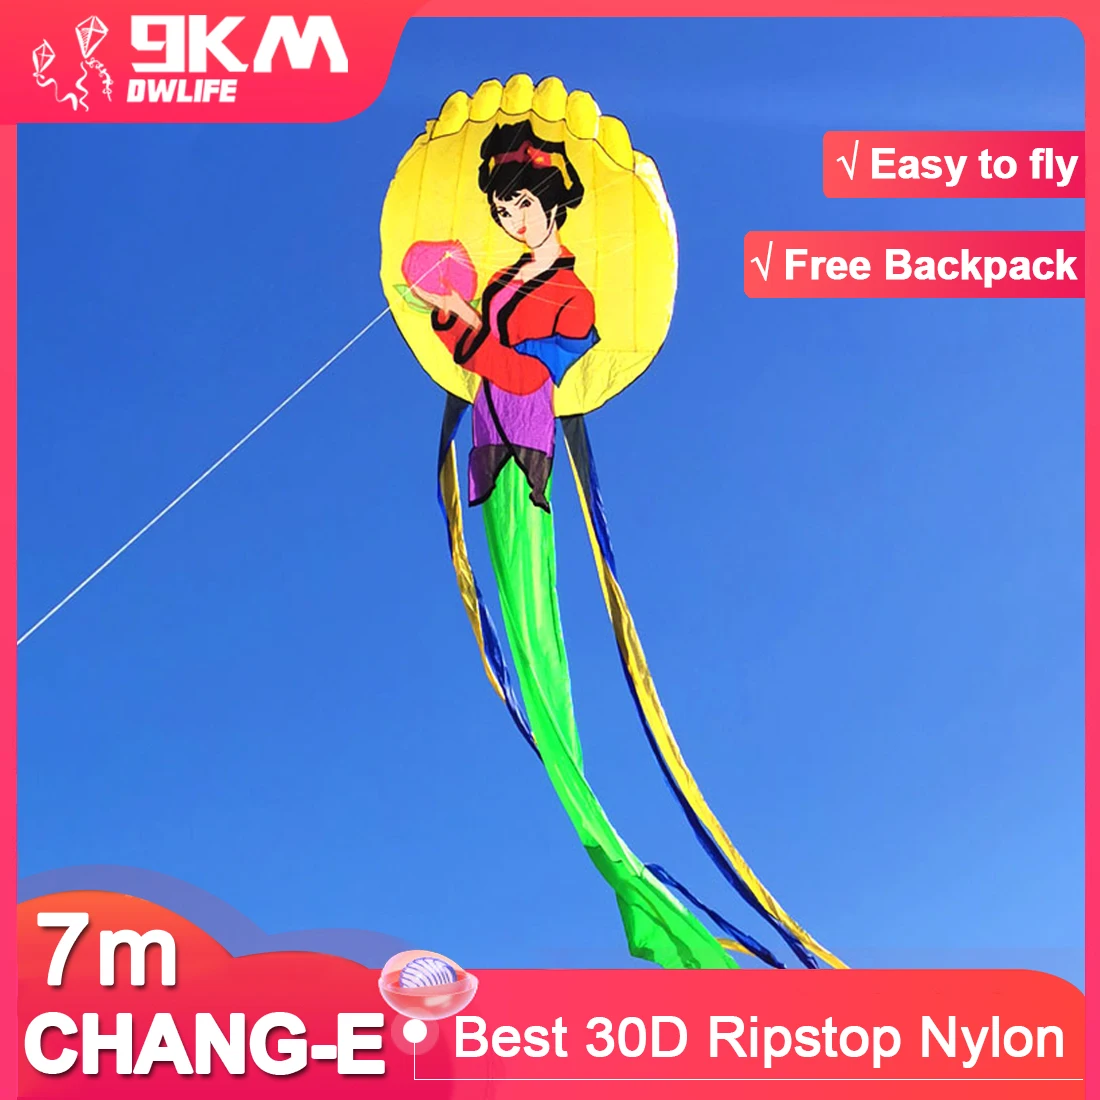 

9KM Best Traditional 3D 7m Soft Kite Fabulous Chang-e Flies to the Moon Single Line Kite 30D Ripstop Nylon with Bag